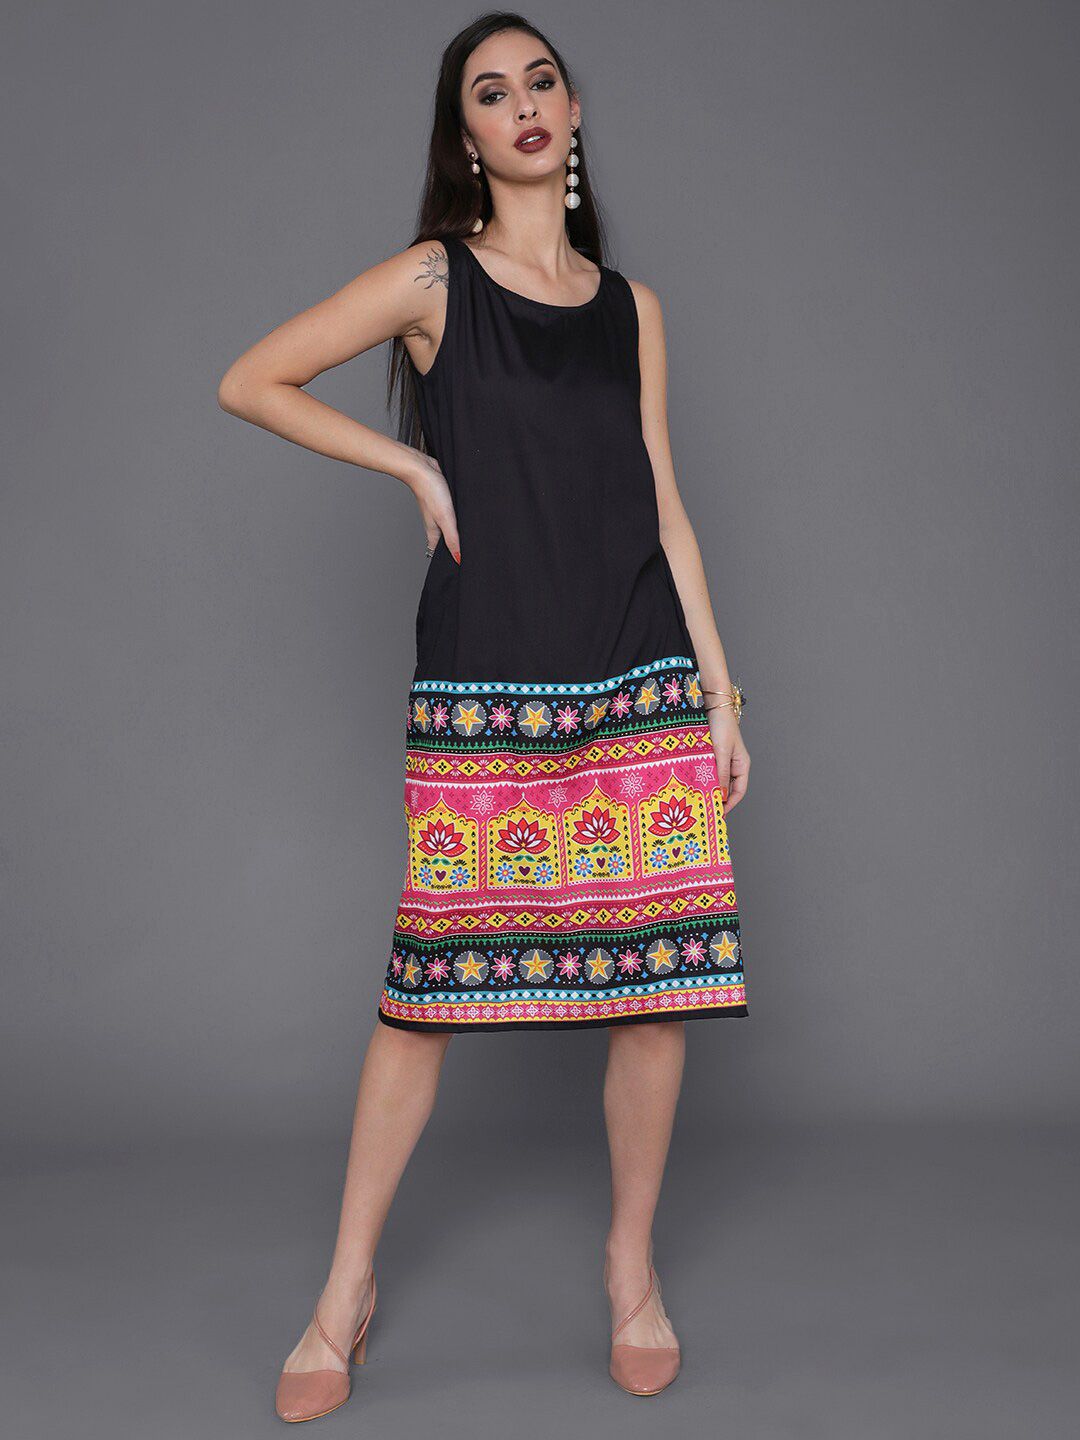 AKS Round Neck Ethnic Motifs Printed Knee Length A-Line Dress Price in India